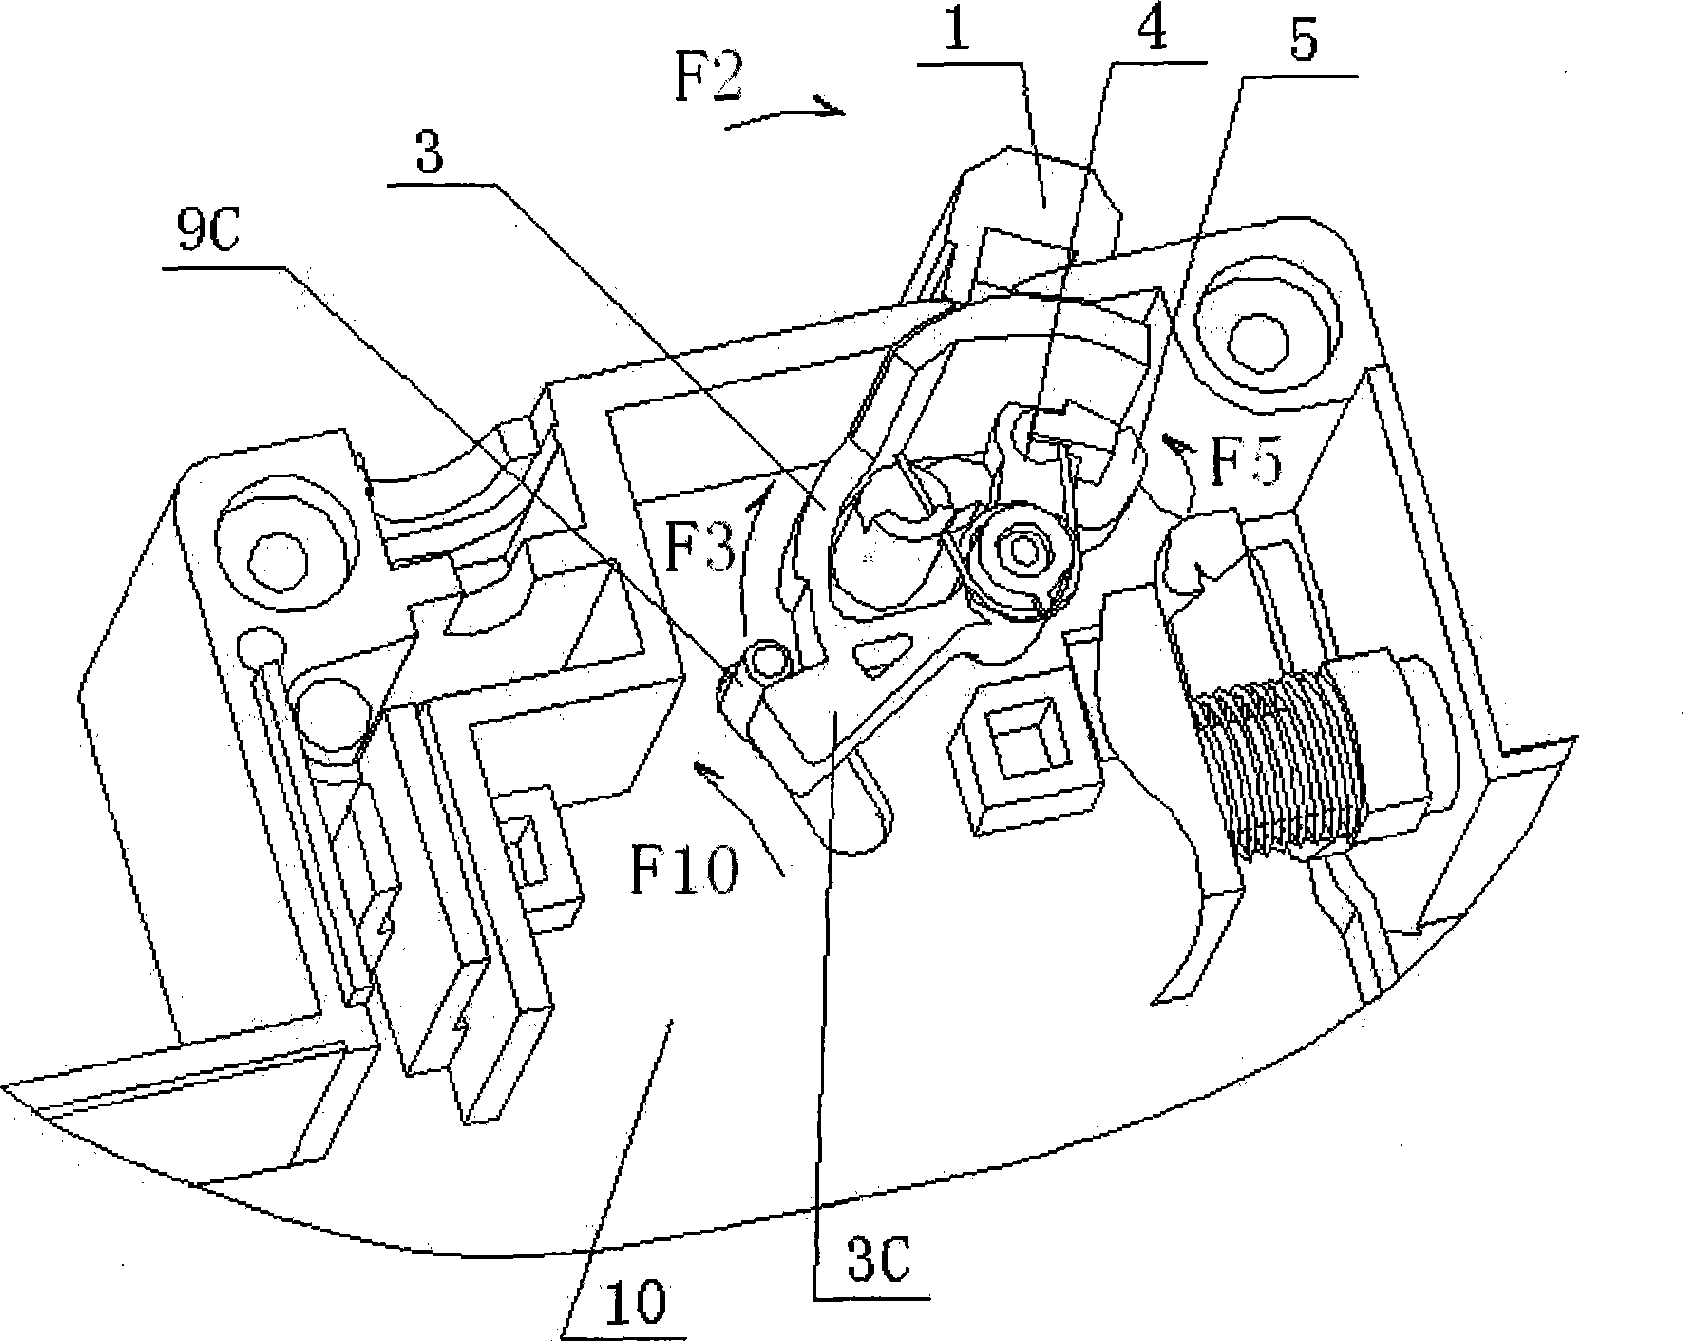 Device for indicating failure of electric apparatus